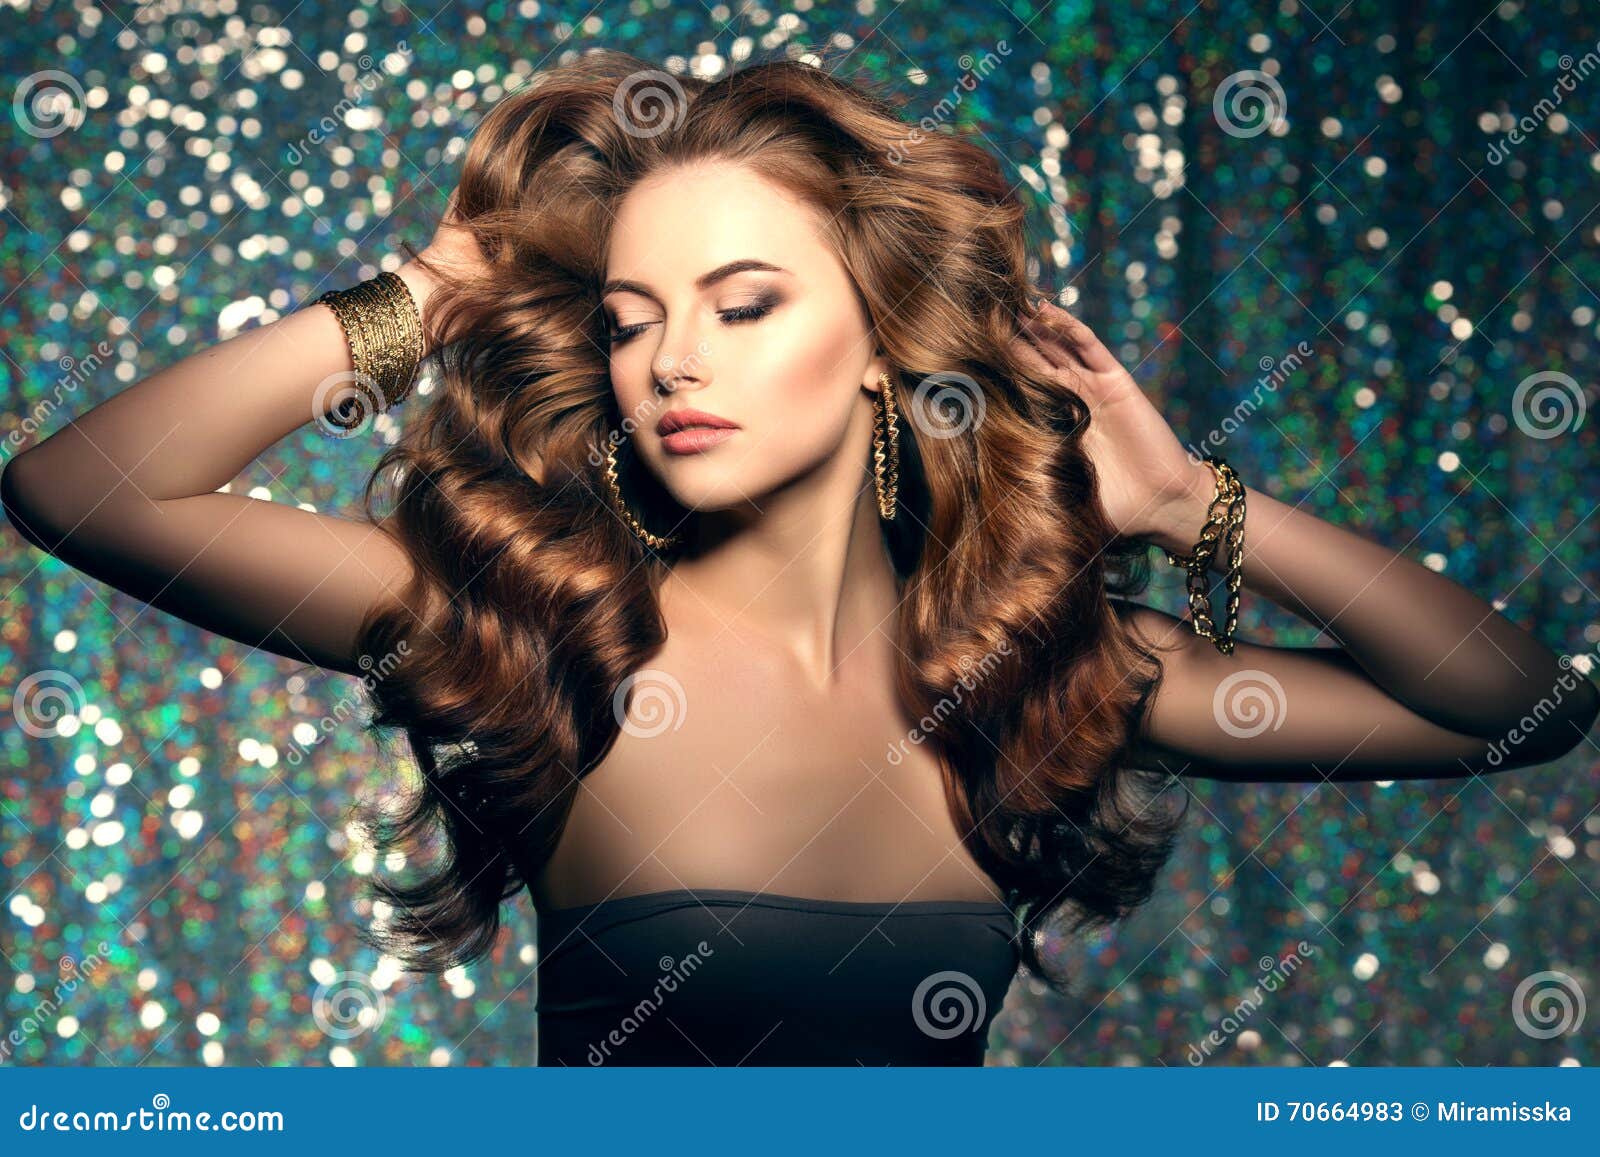 Woman Club Lights Party Background. Dancing Girl Long Hair Stock Image -  Image of bright, event: 70664983